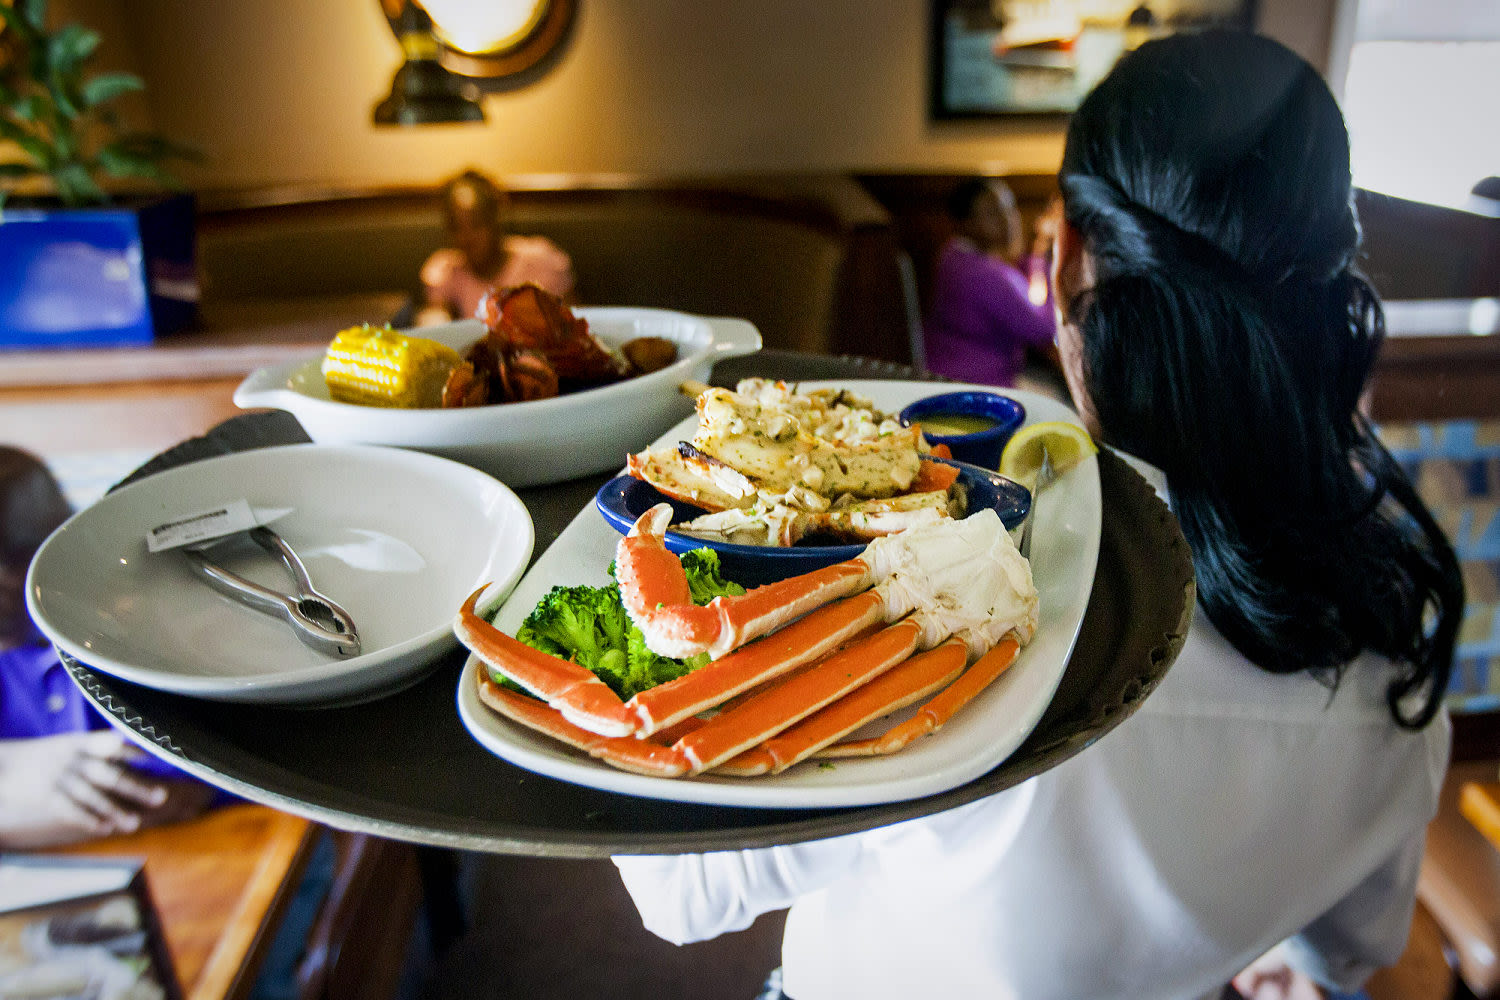 Opinion | Why Red Lobster’s downfall hits differently for Black communities